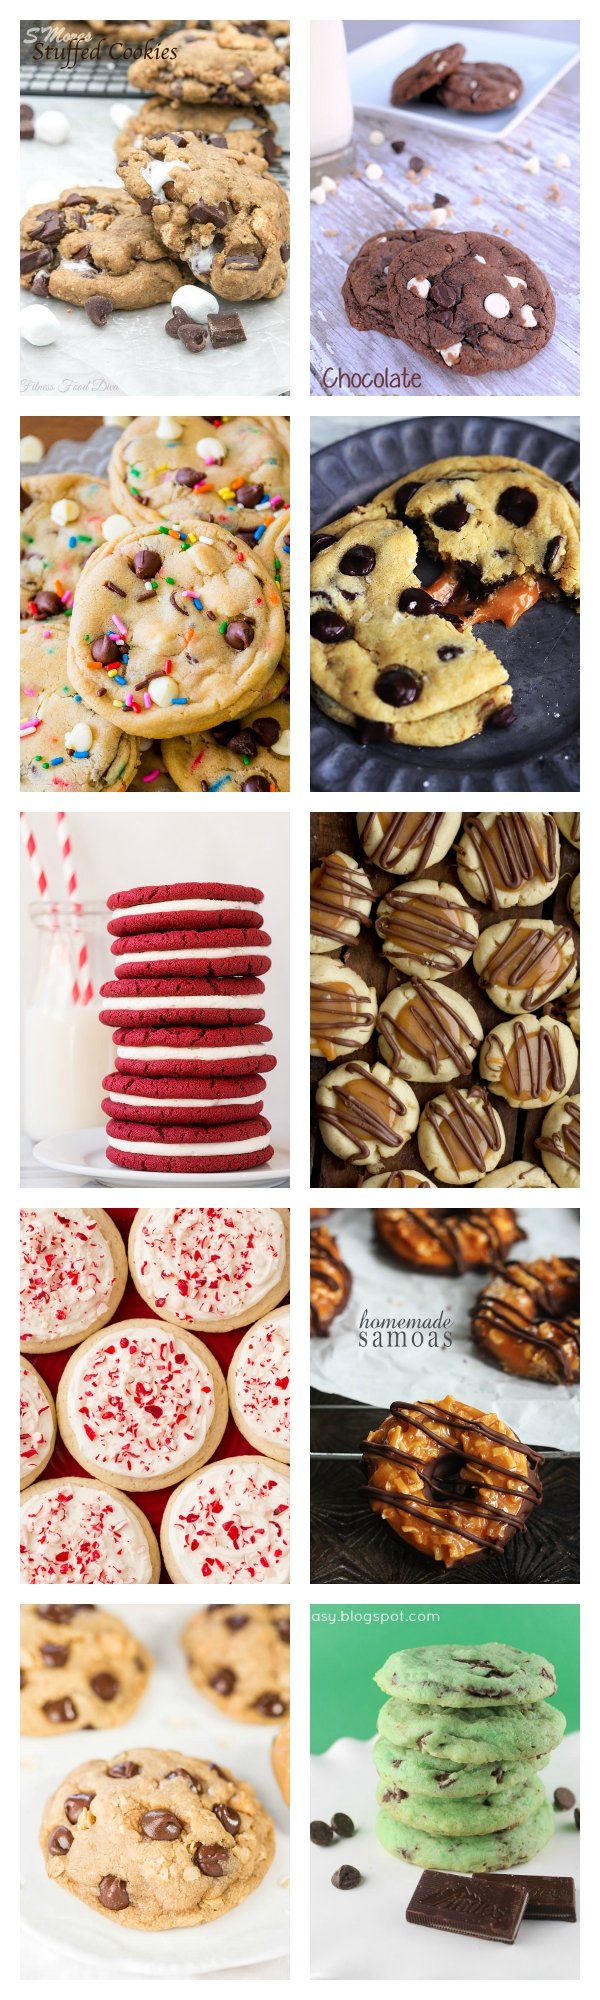 CookieCollage5